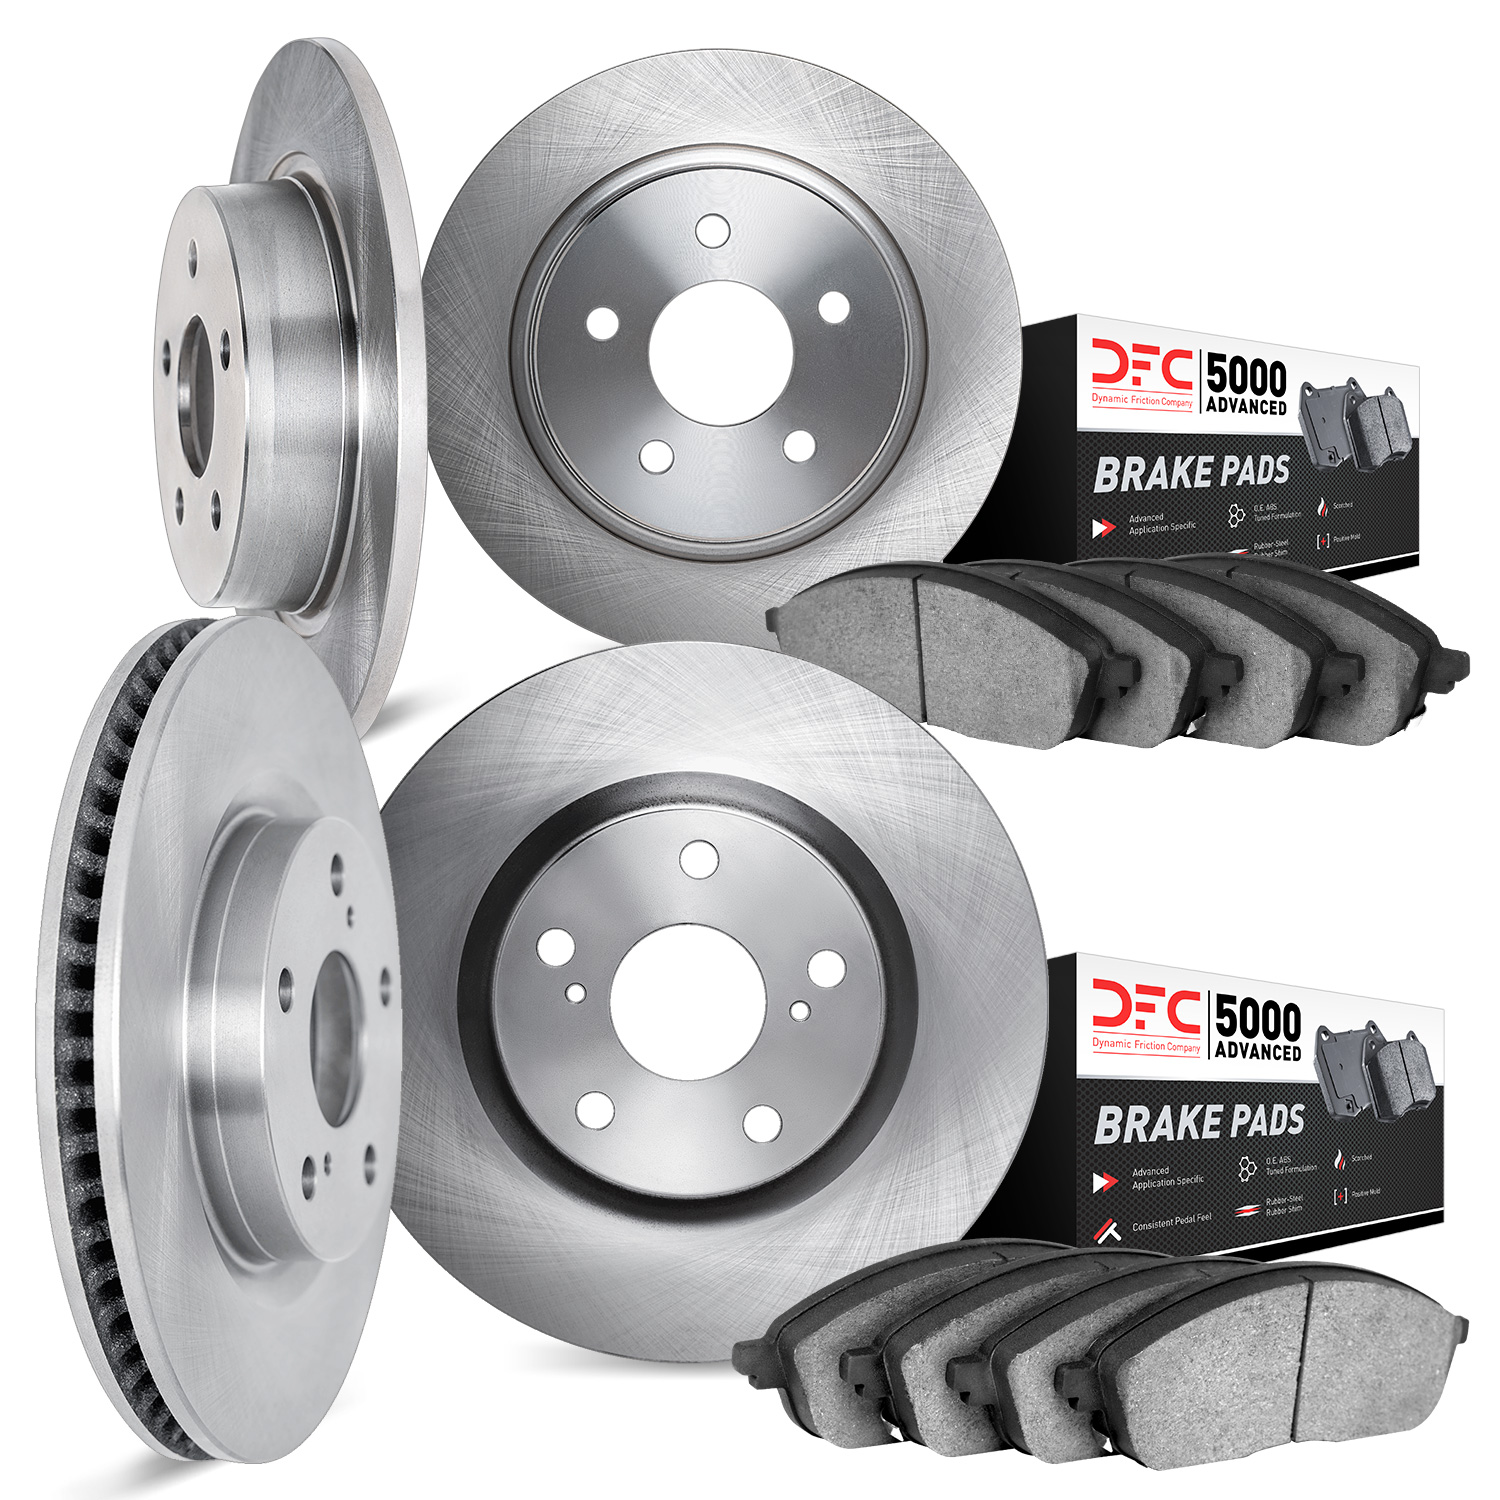 6504-76388 Brake Rotors w/5000 Advanced Brake Pads Kit, 2003-2008 Multiple Makes/Models, Position: Front and Rear